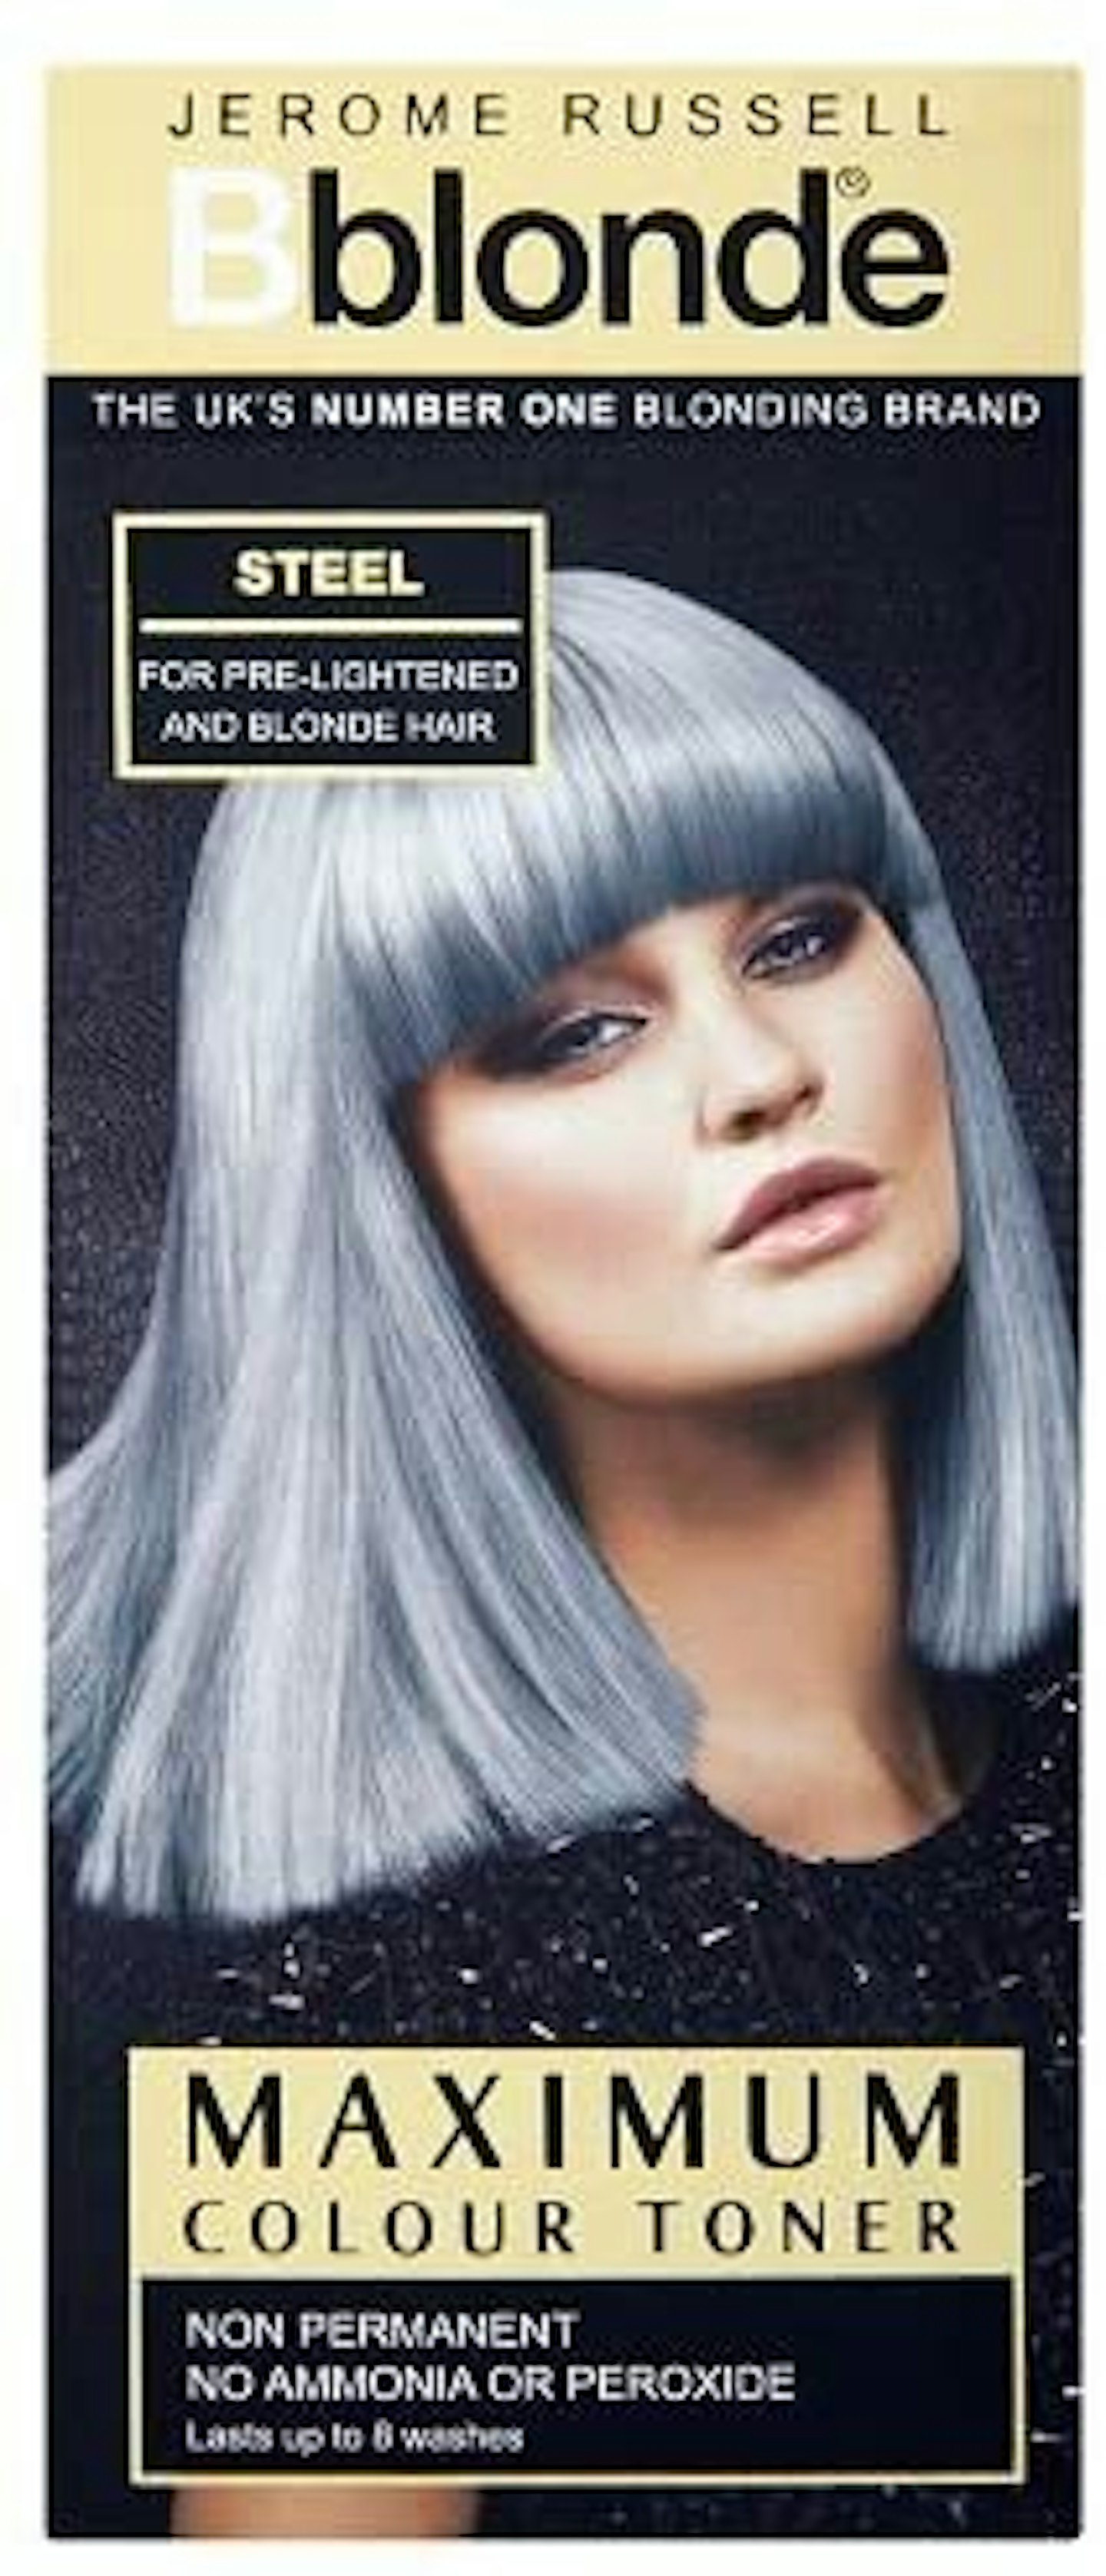 Jerome Russell, Bblonde Toner, Steel (Pack of 3), £15.99